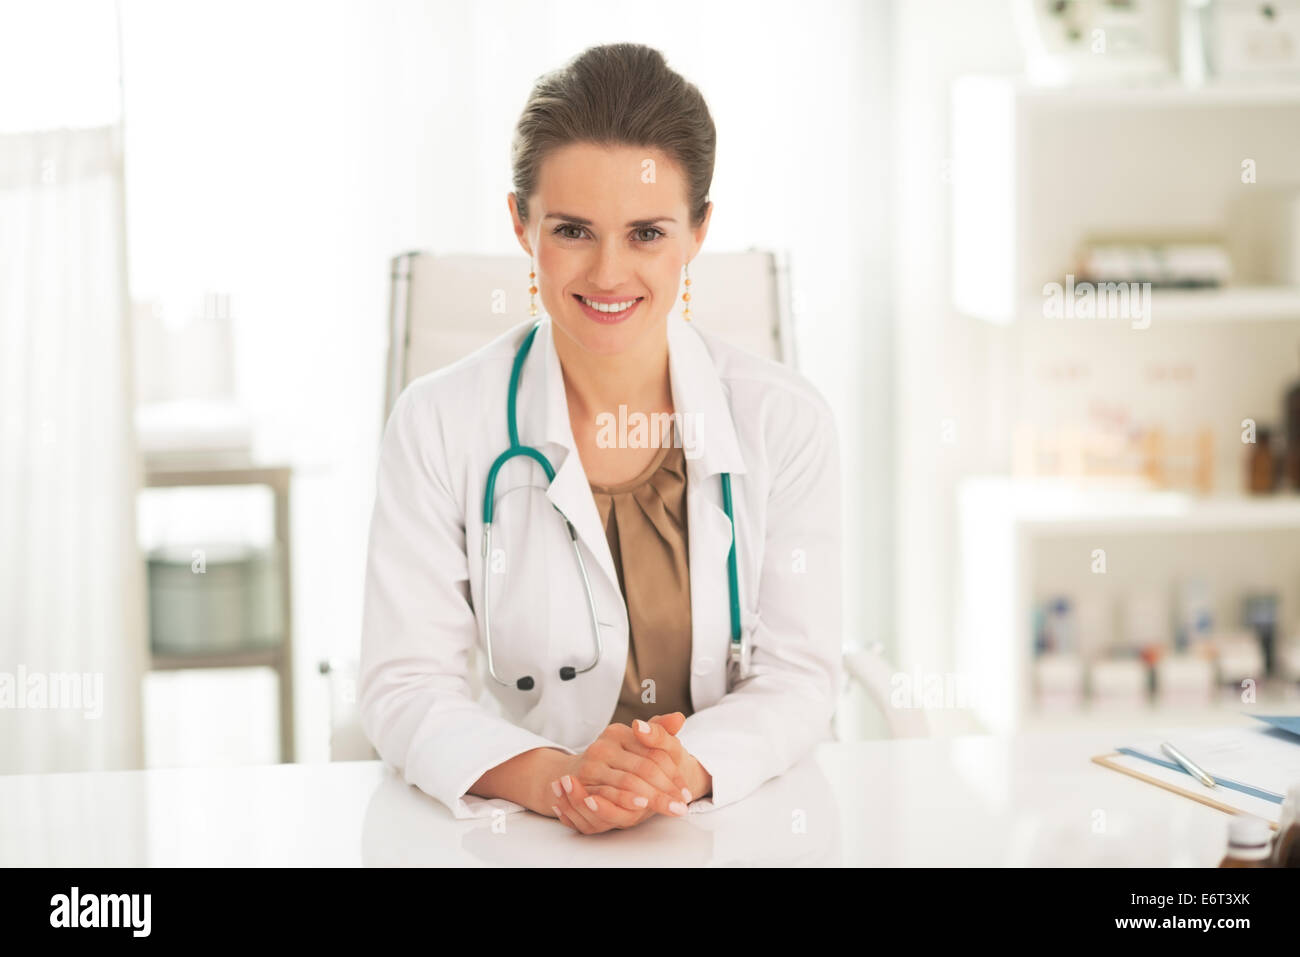 Portrait of smiling doctor woman in office Stock Photo